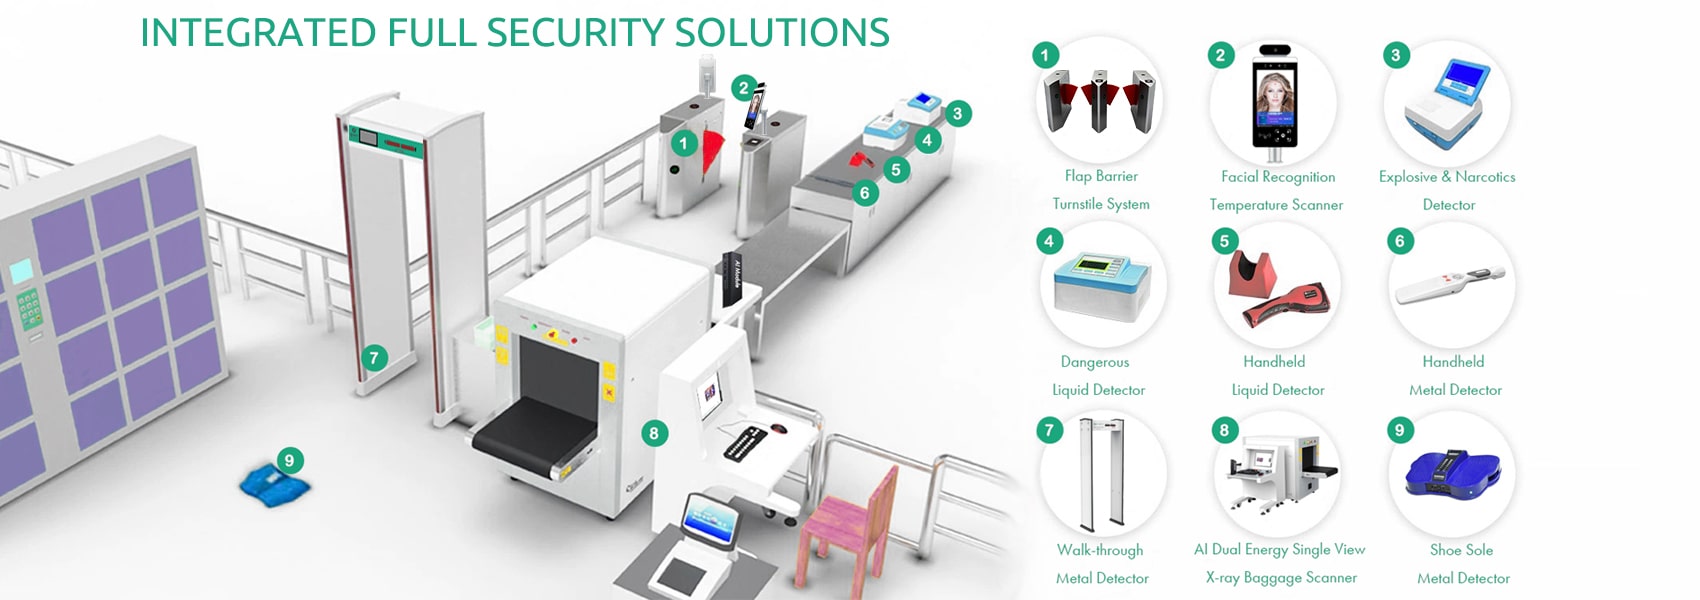 INTEGRATION FULLY SECURITY SOLUTIONS